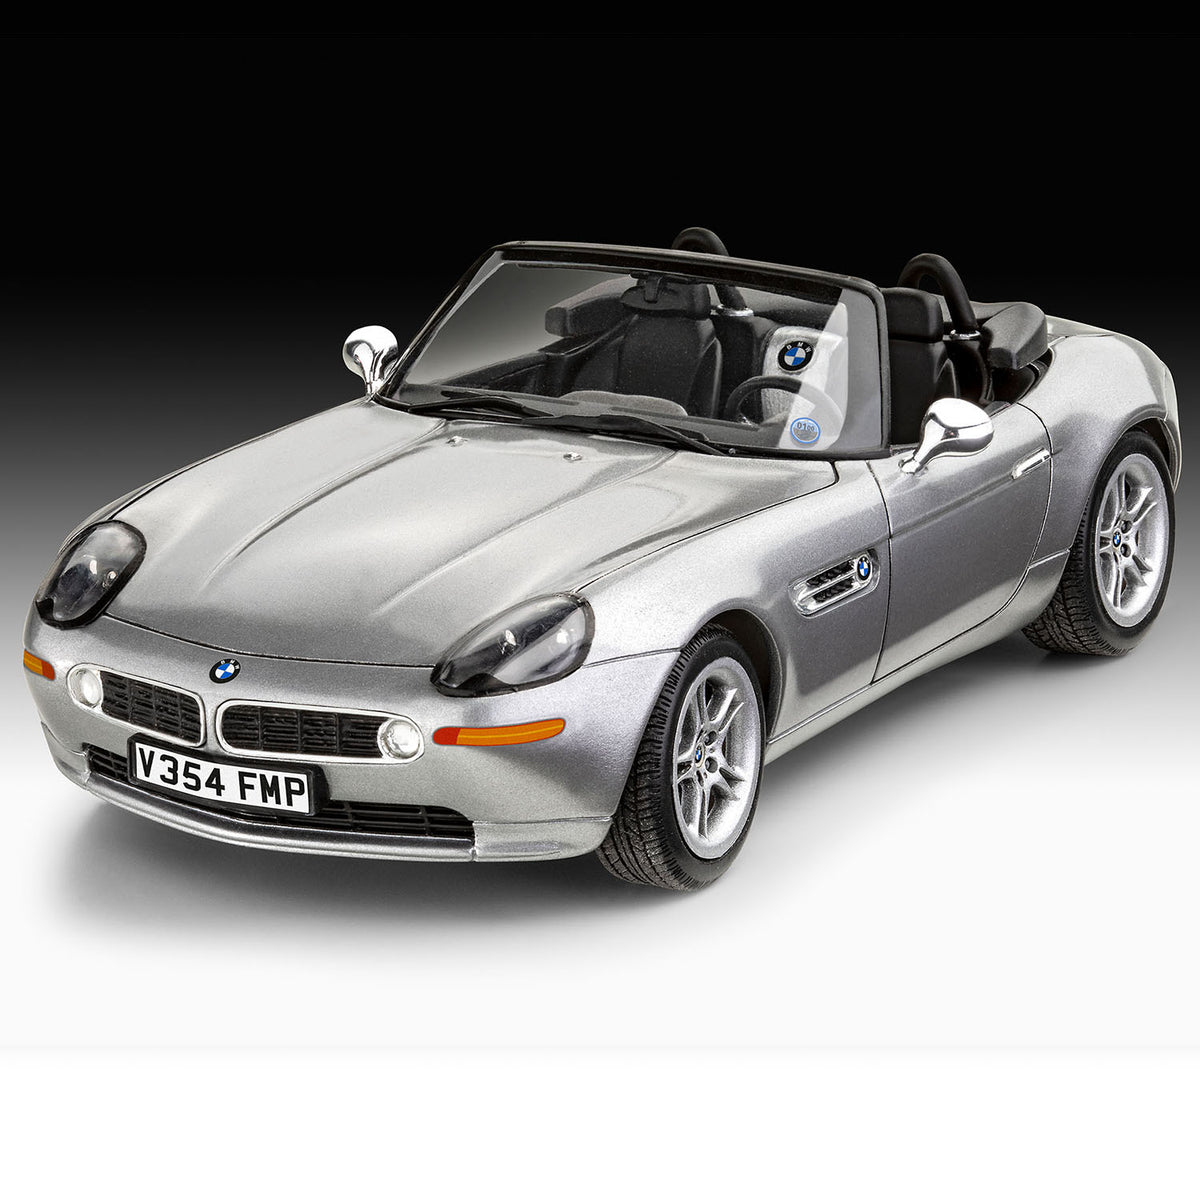 James Bond BMW Z8 Model Car Kit - The World Is Not Enough Edition - By Revell